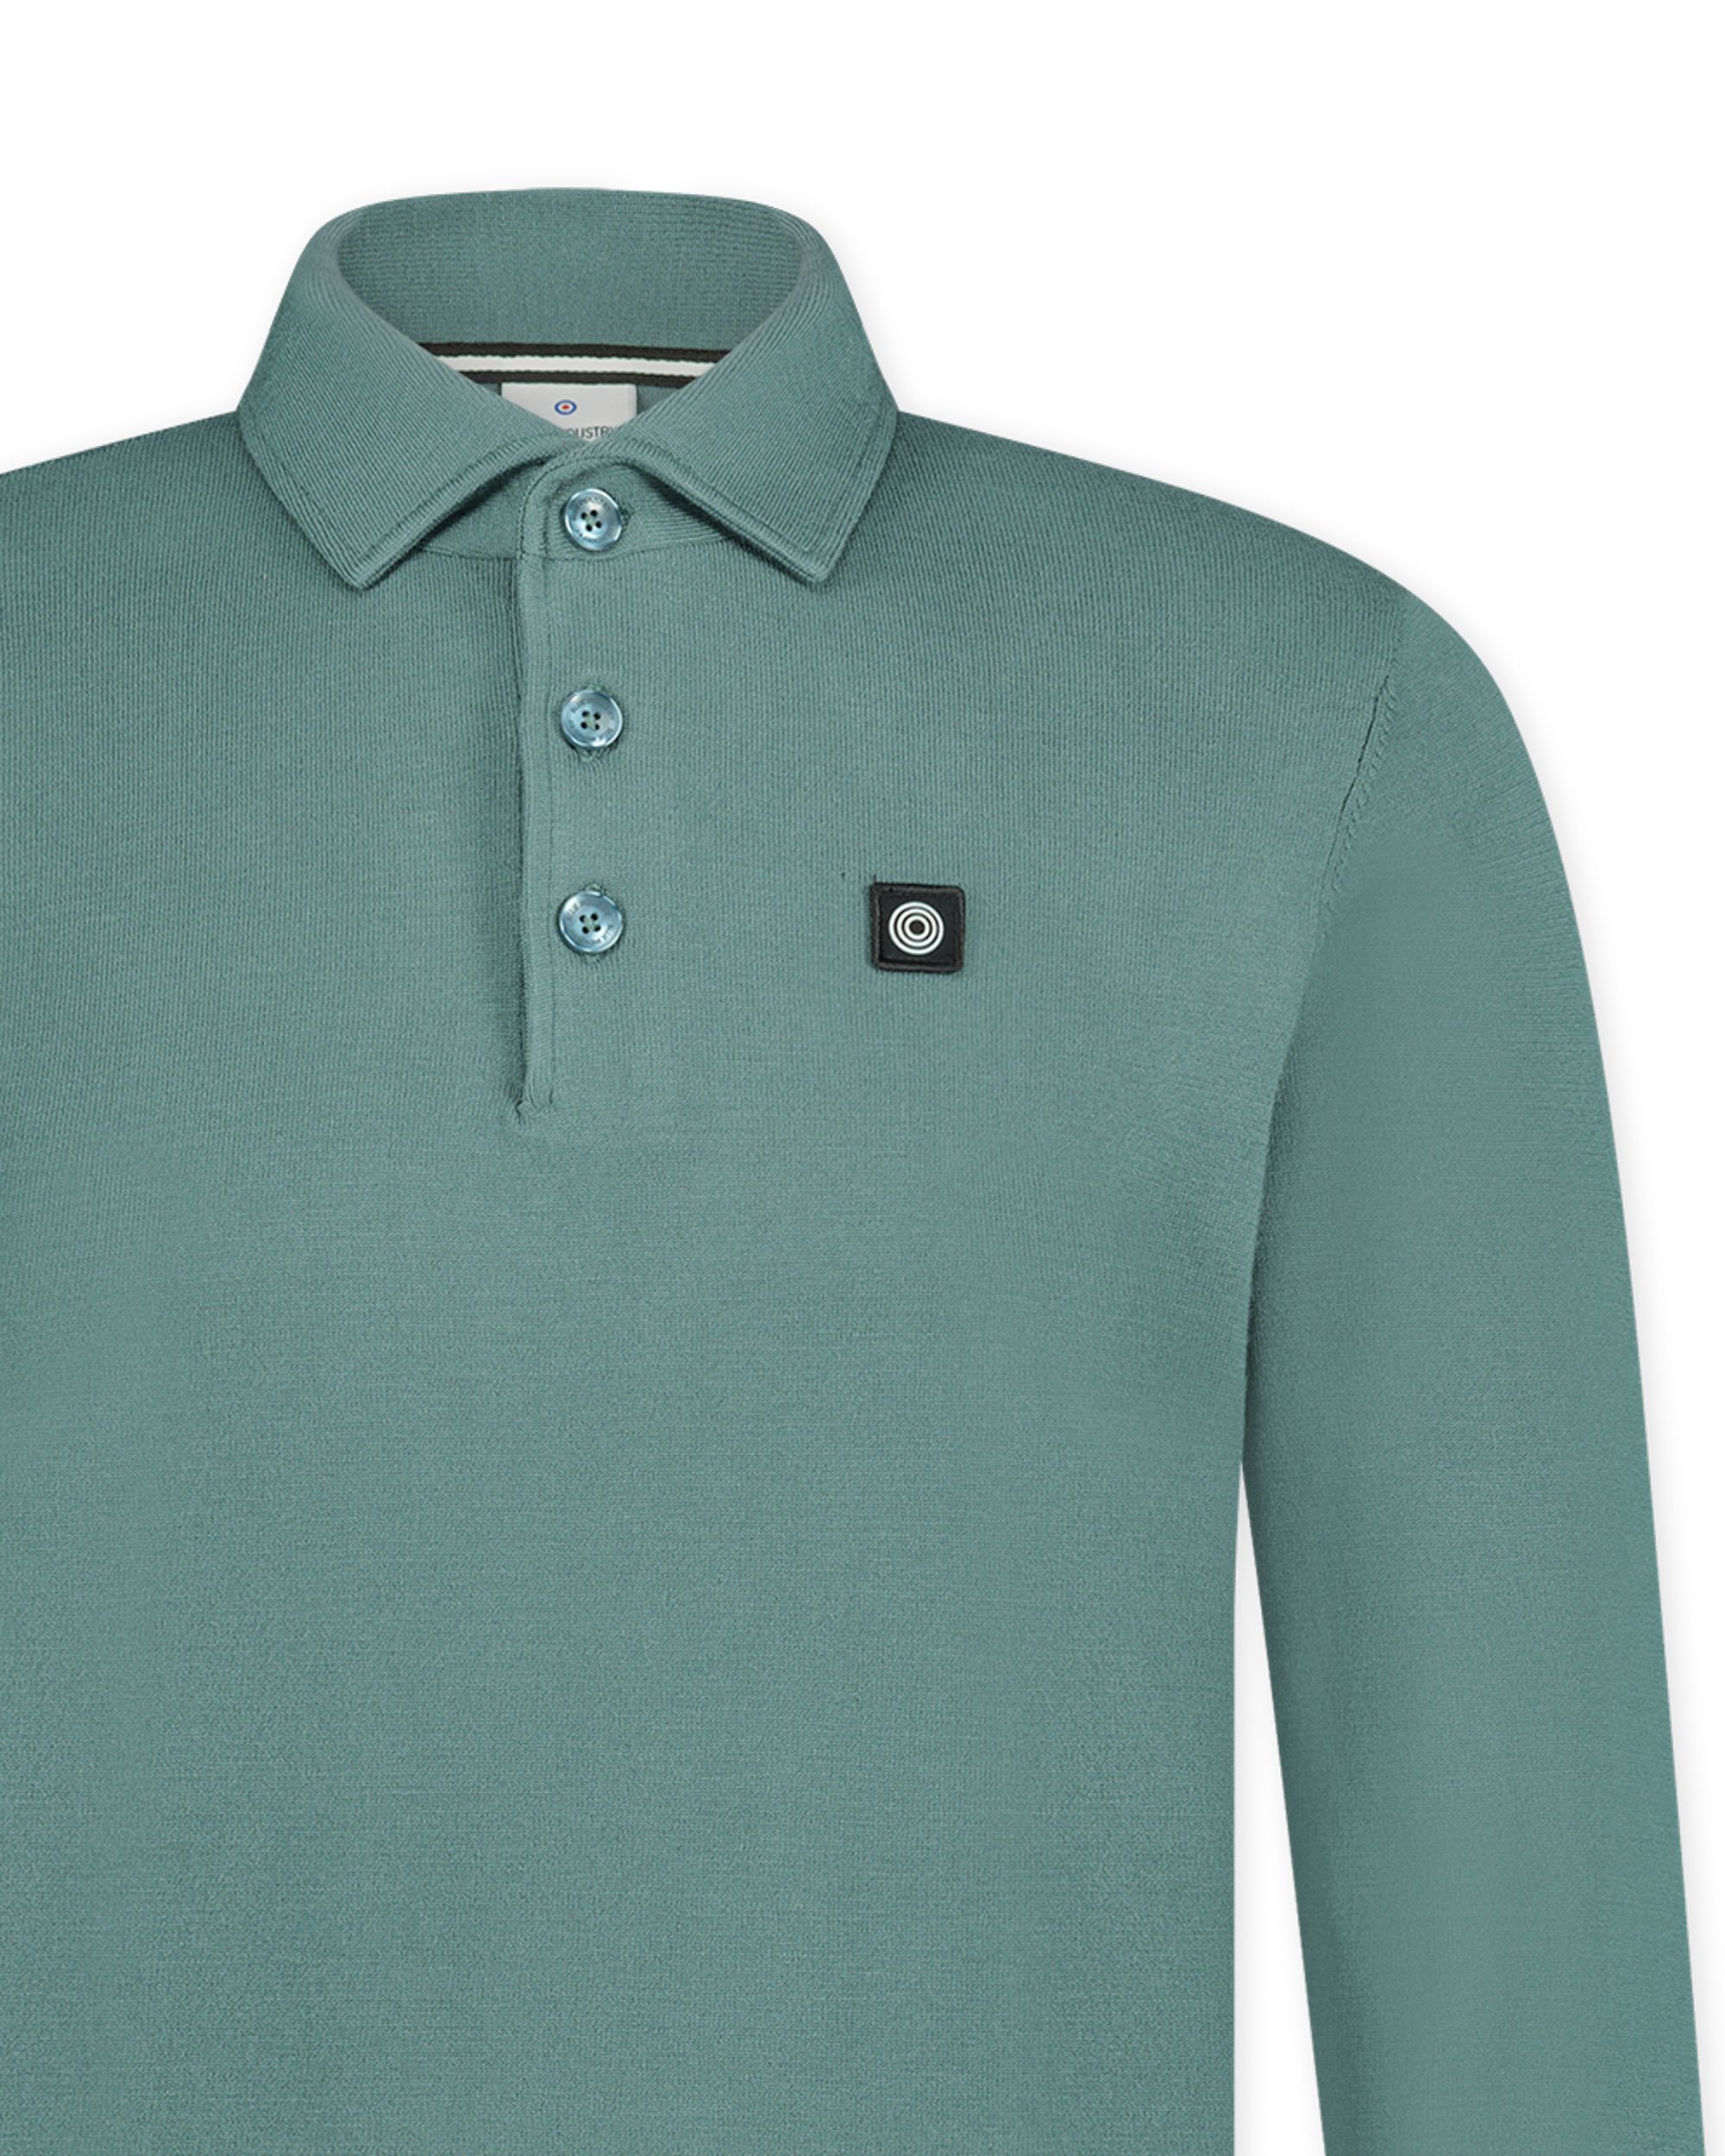 Blue Industry Polo LM Groen 091029-001-L